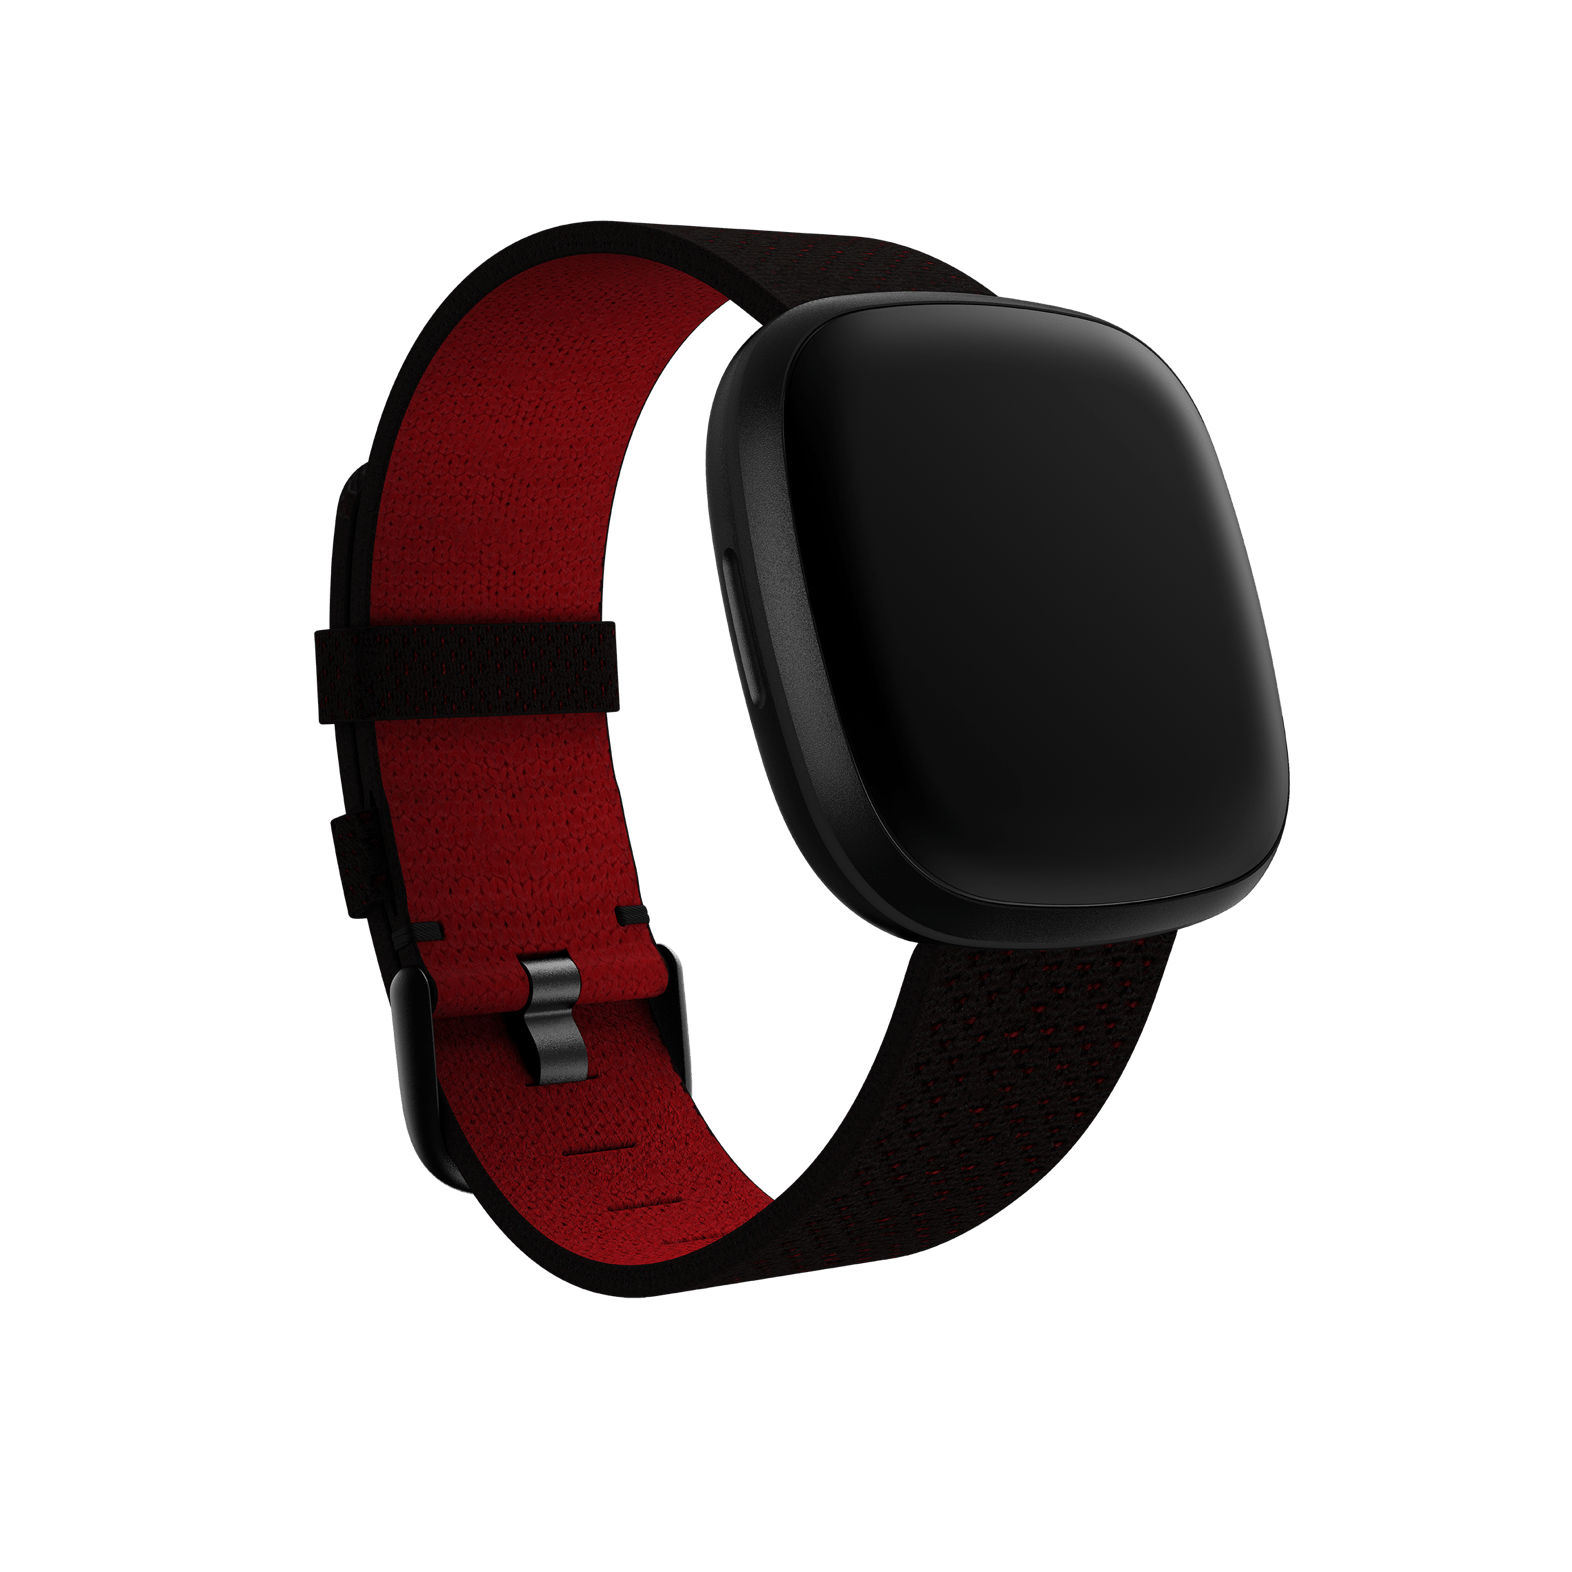 buy fitbit in stores